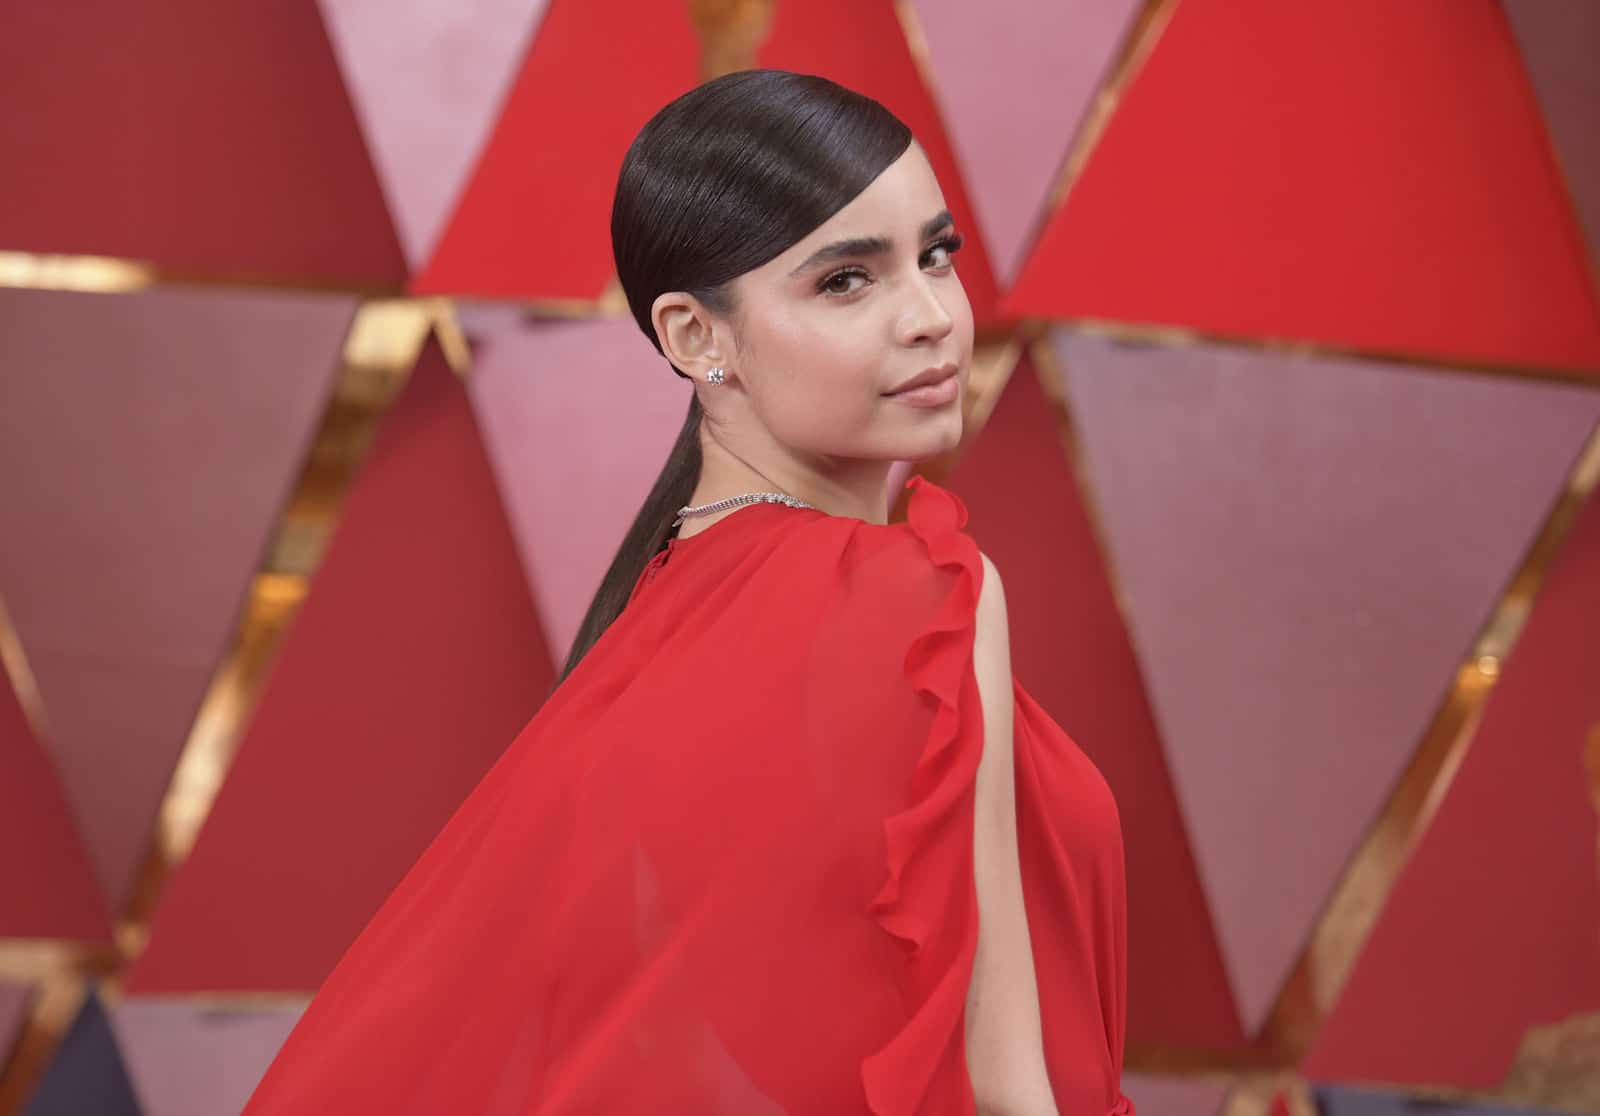 Sofia Carson arrives at the Oscars on Sunday, March 4, 2018, at the Dolby Theatre in Los Angeles. (Photo by Richard Shotwell/Invision/AP)